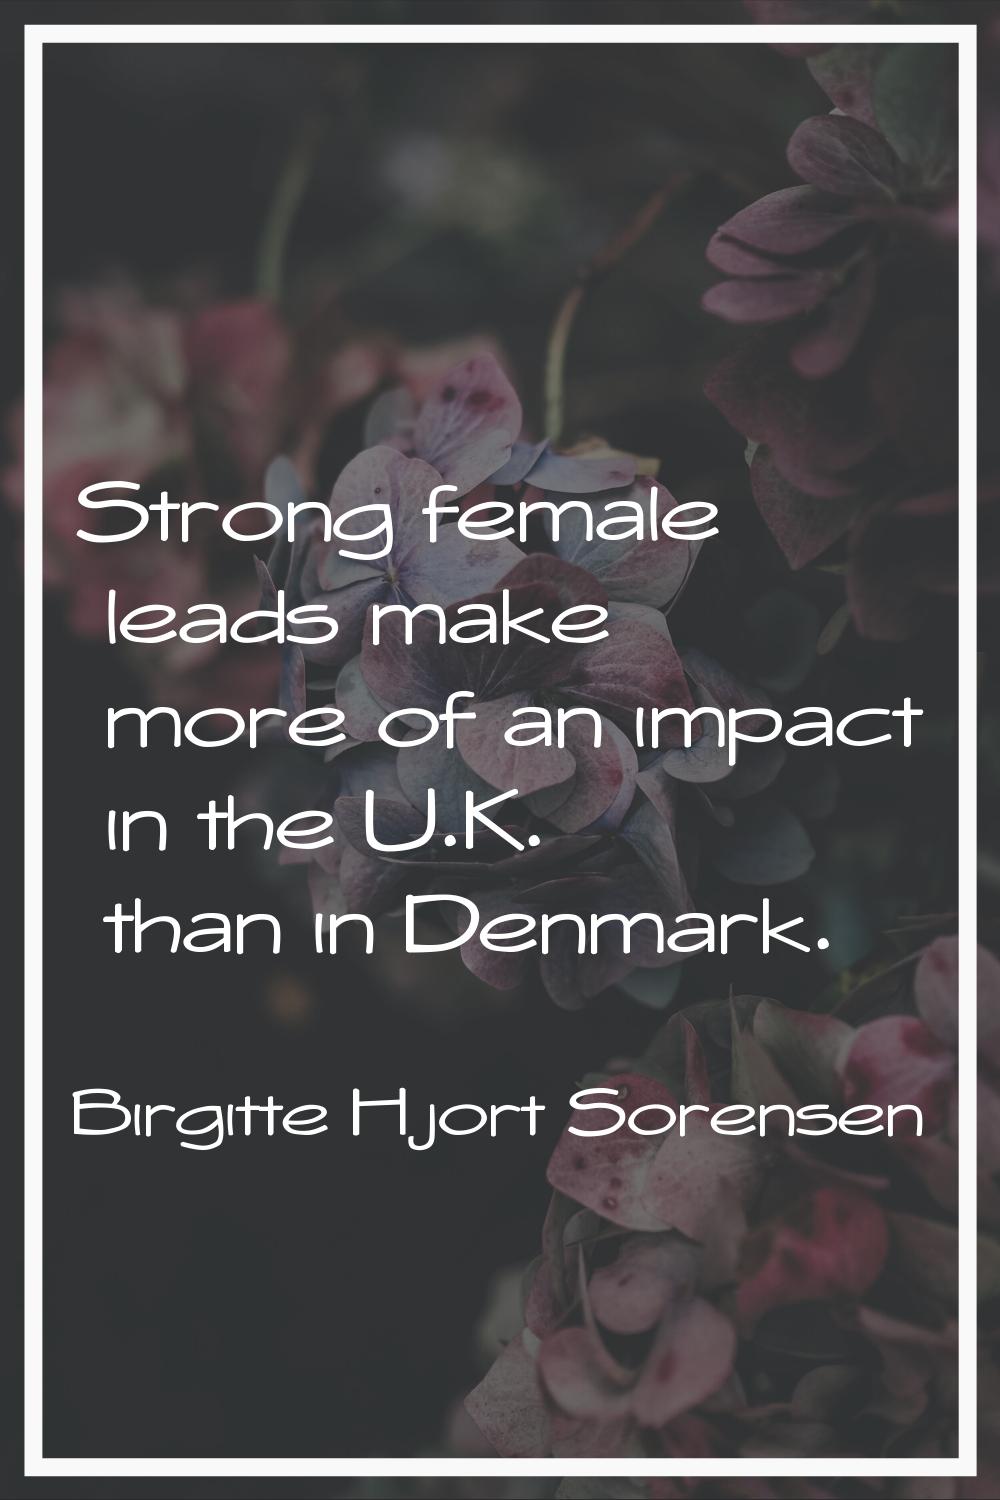 Strong female leads make more of an impact in the U.K. than in Denmark.